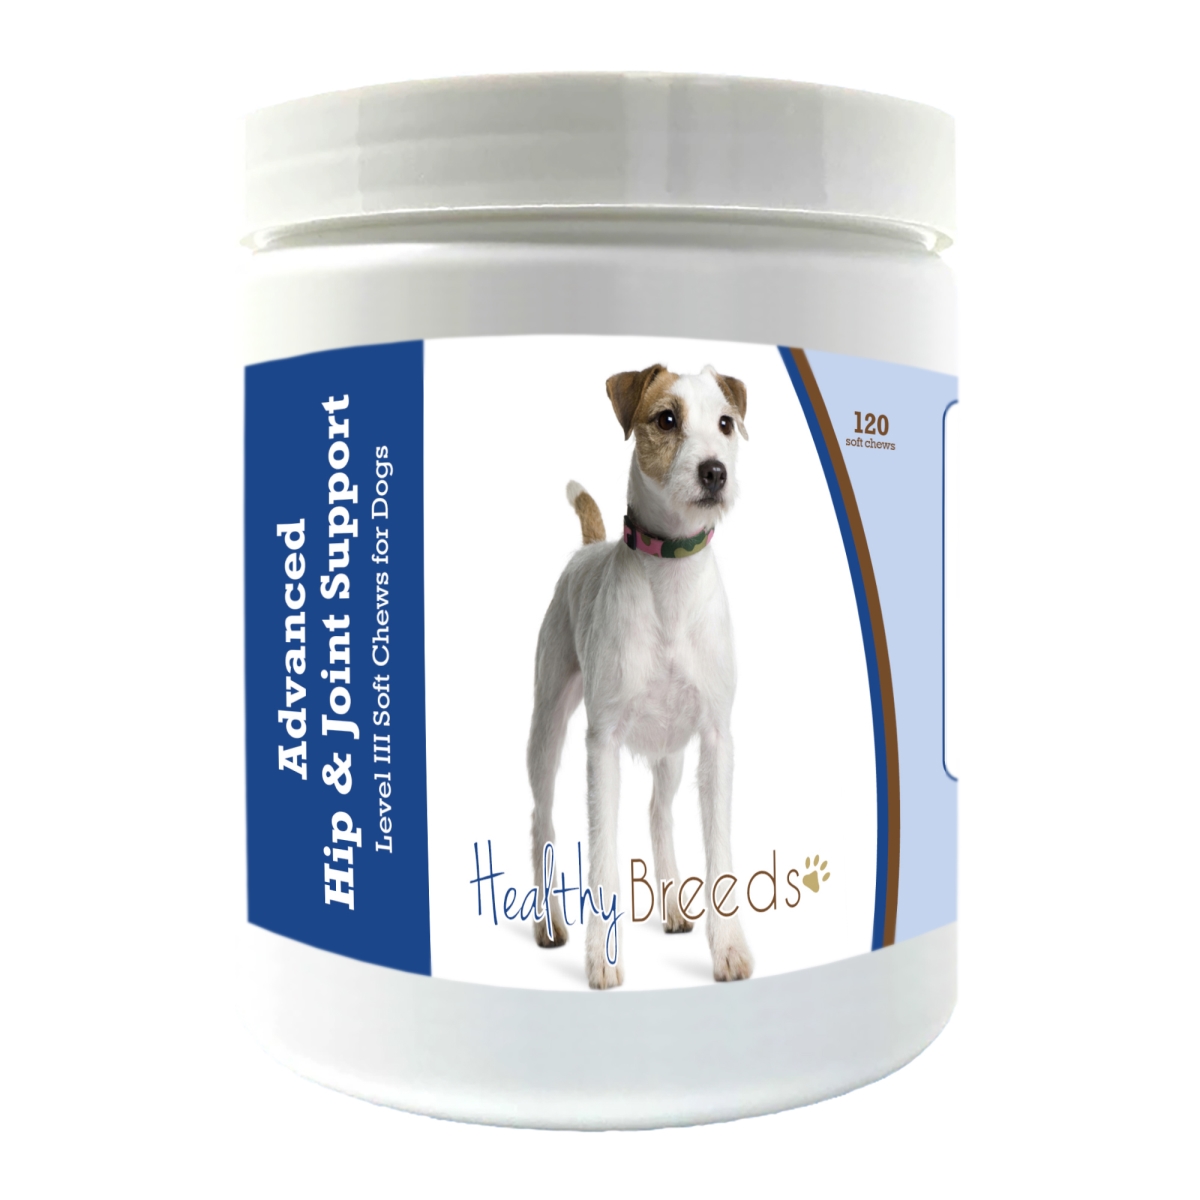 Picture of Healthy Breeds 192959899009 Parson Russell Terrier Advanced Hip & Joint Support Level III Soft Chews for Dogs